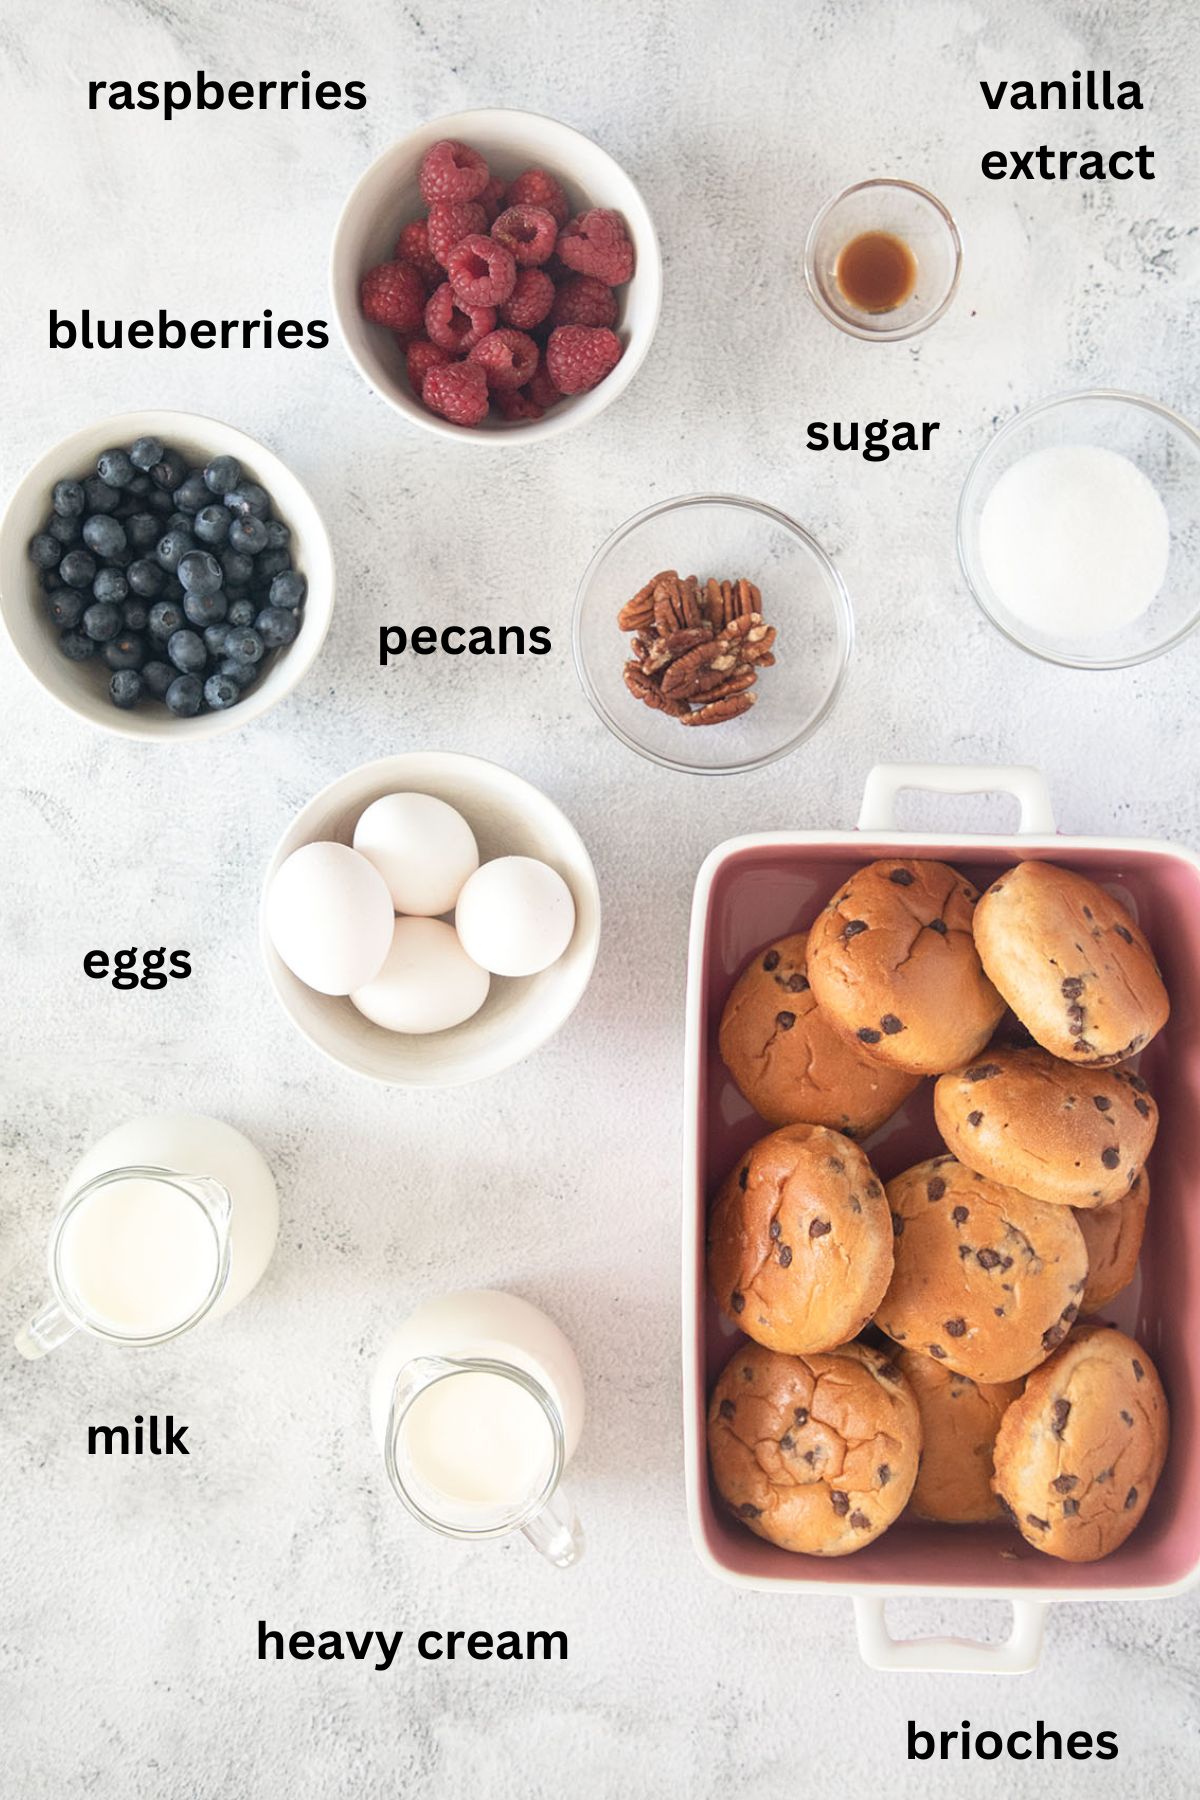 listed ingredients for making baked french toast casserole with brioche and berries.